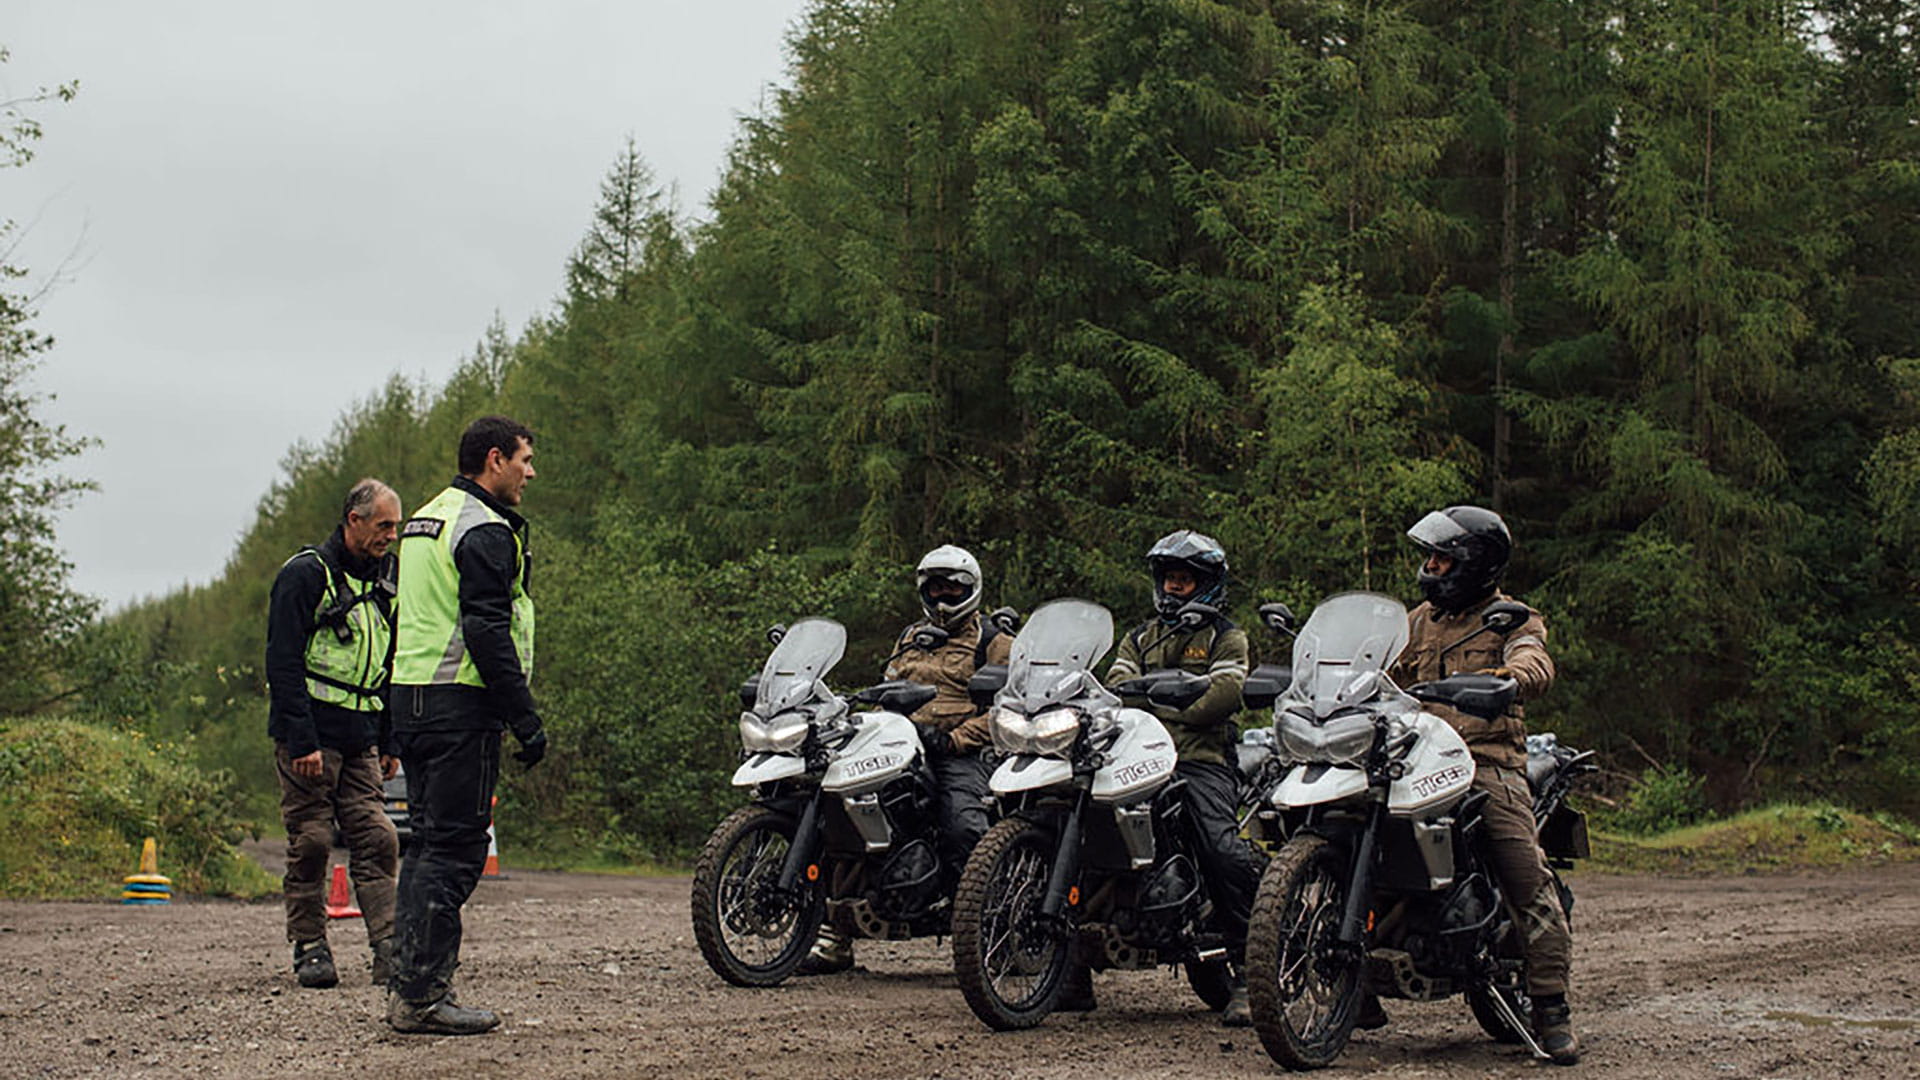 Triumph training course for Tiger 800 experience day